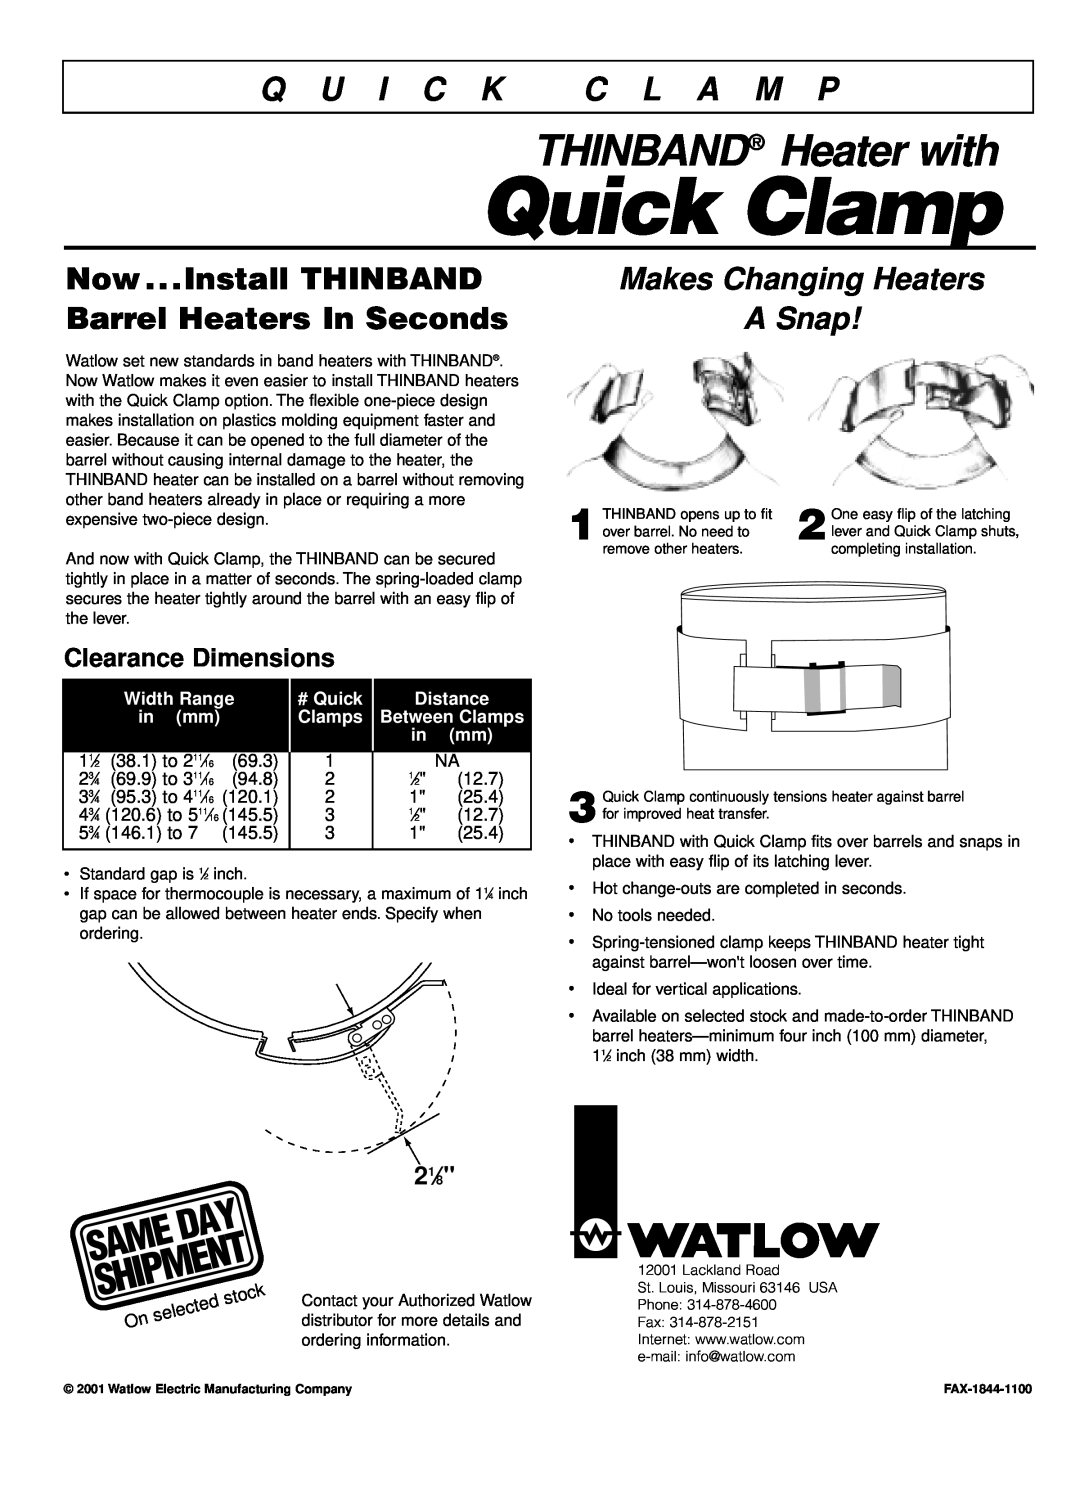 Watlow Electric Stock Heater dimensions Quick Clamp, THINBAND Heater with, Q U I C K C L A M P, Clearance Dimensions 